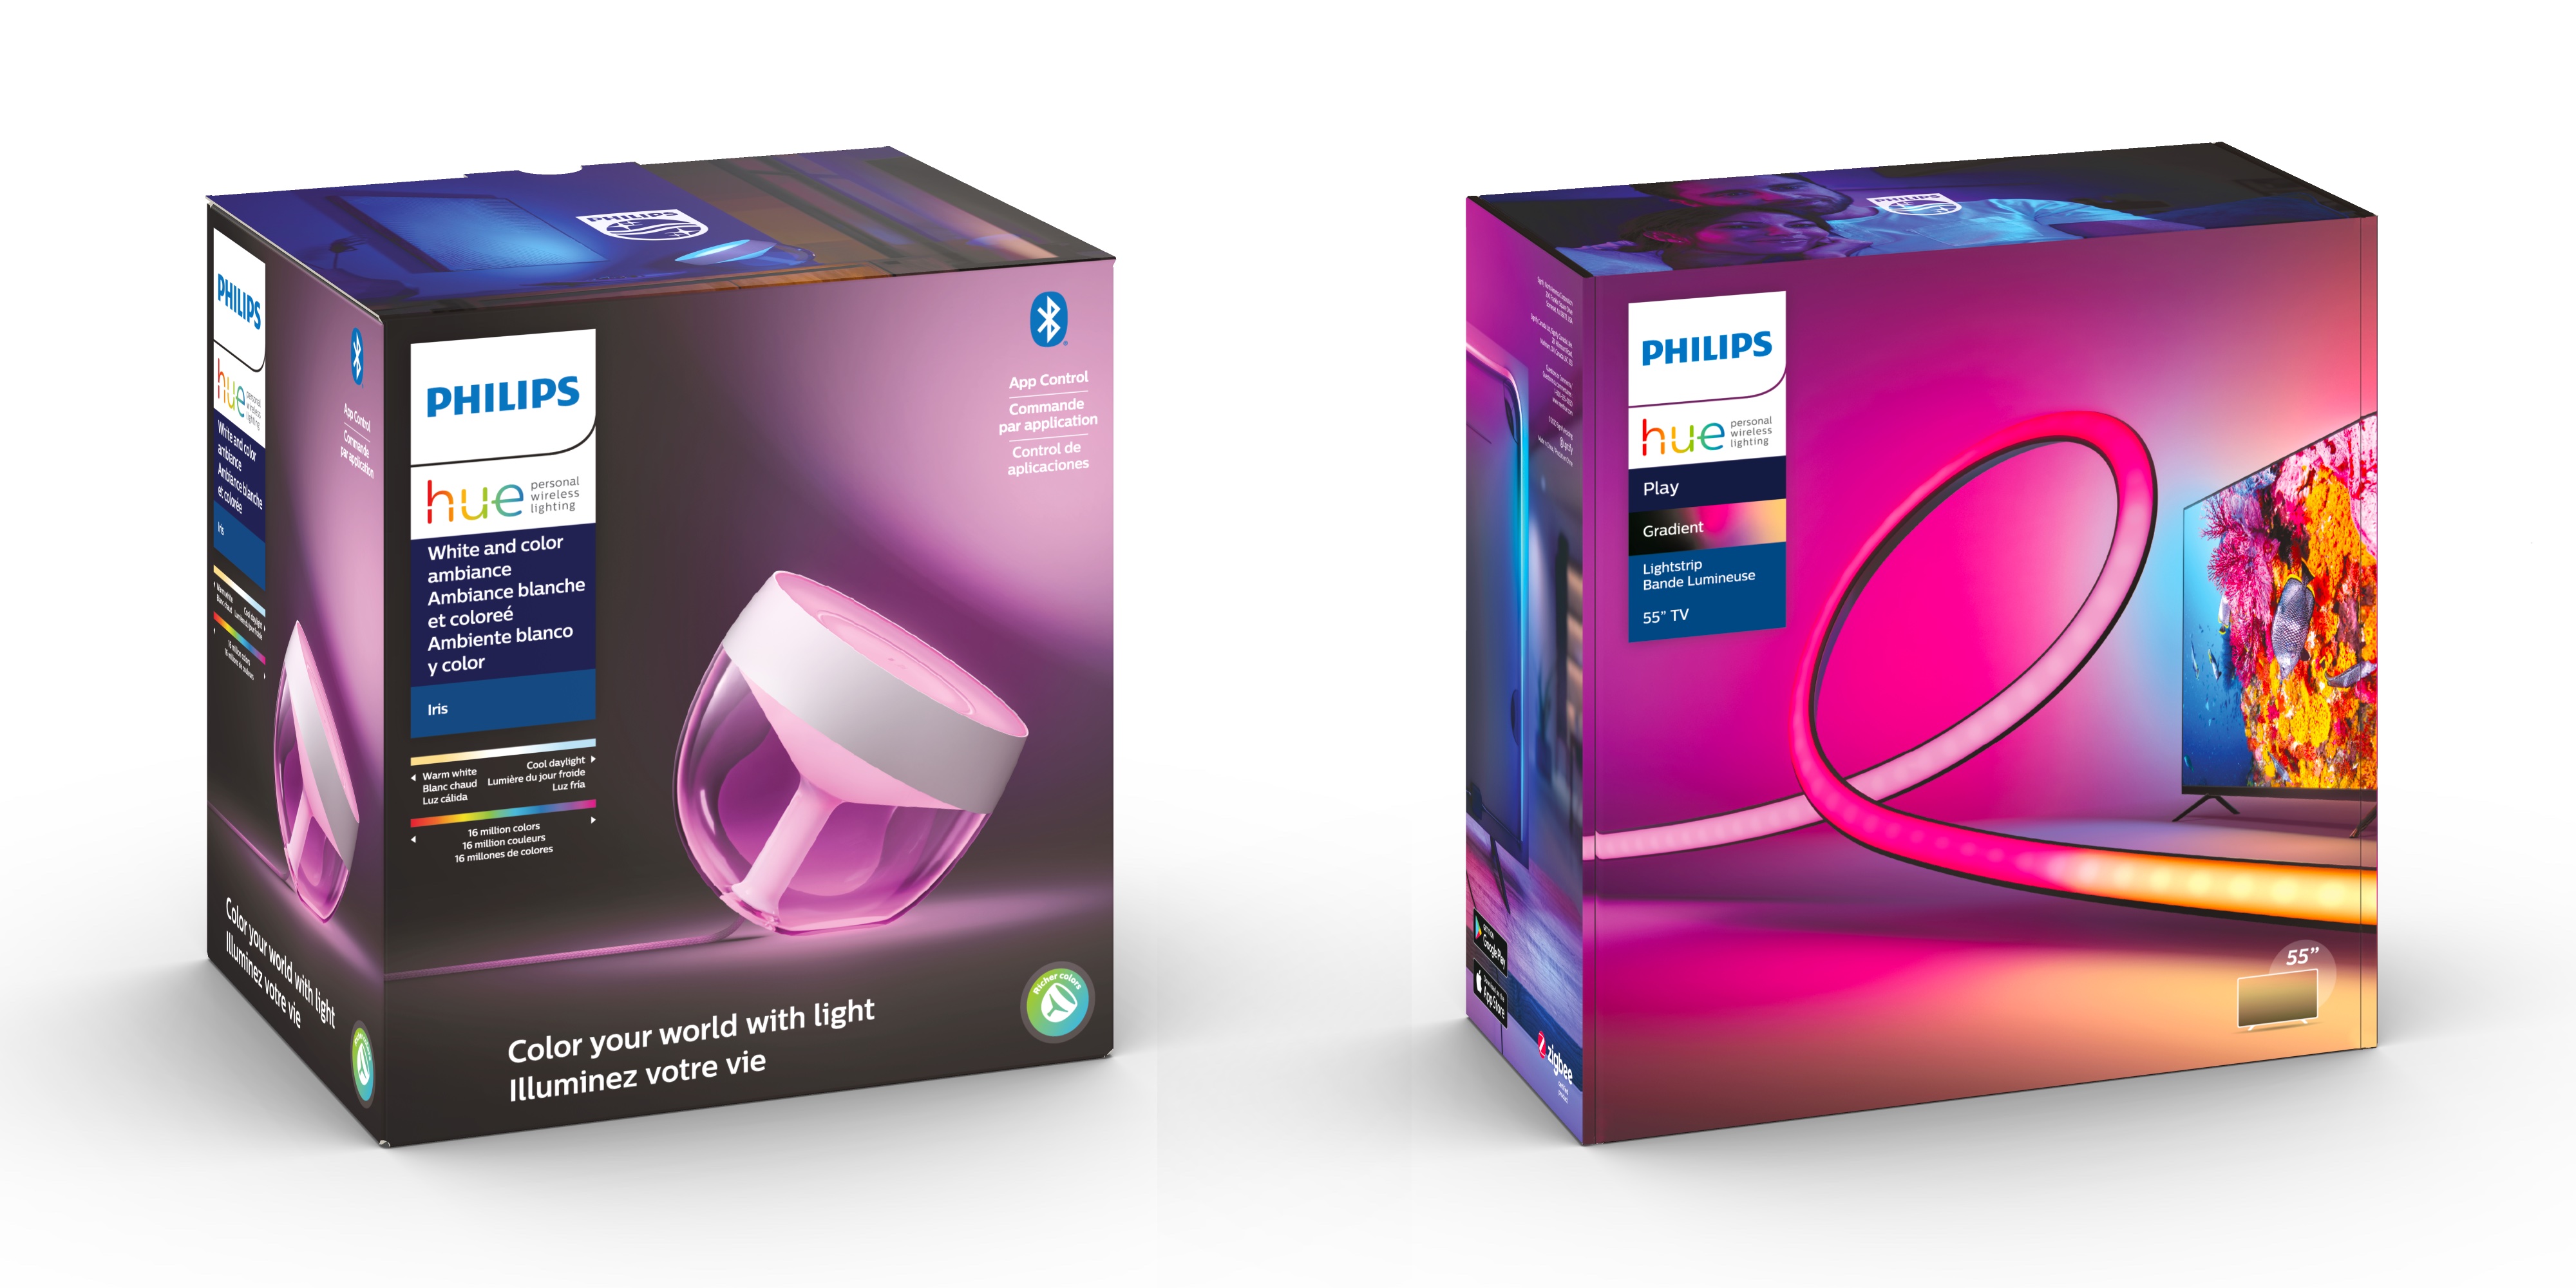 Signify unveils new Philips Hue smart lighting products